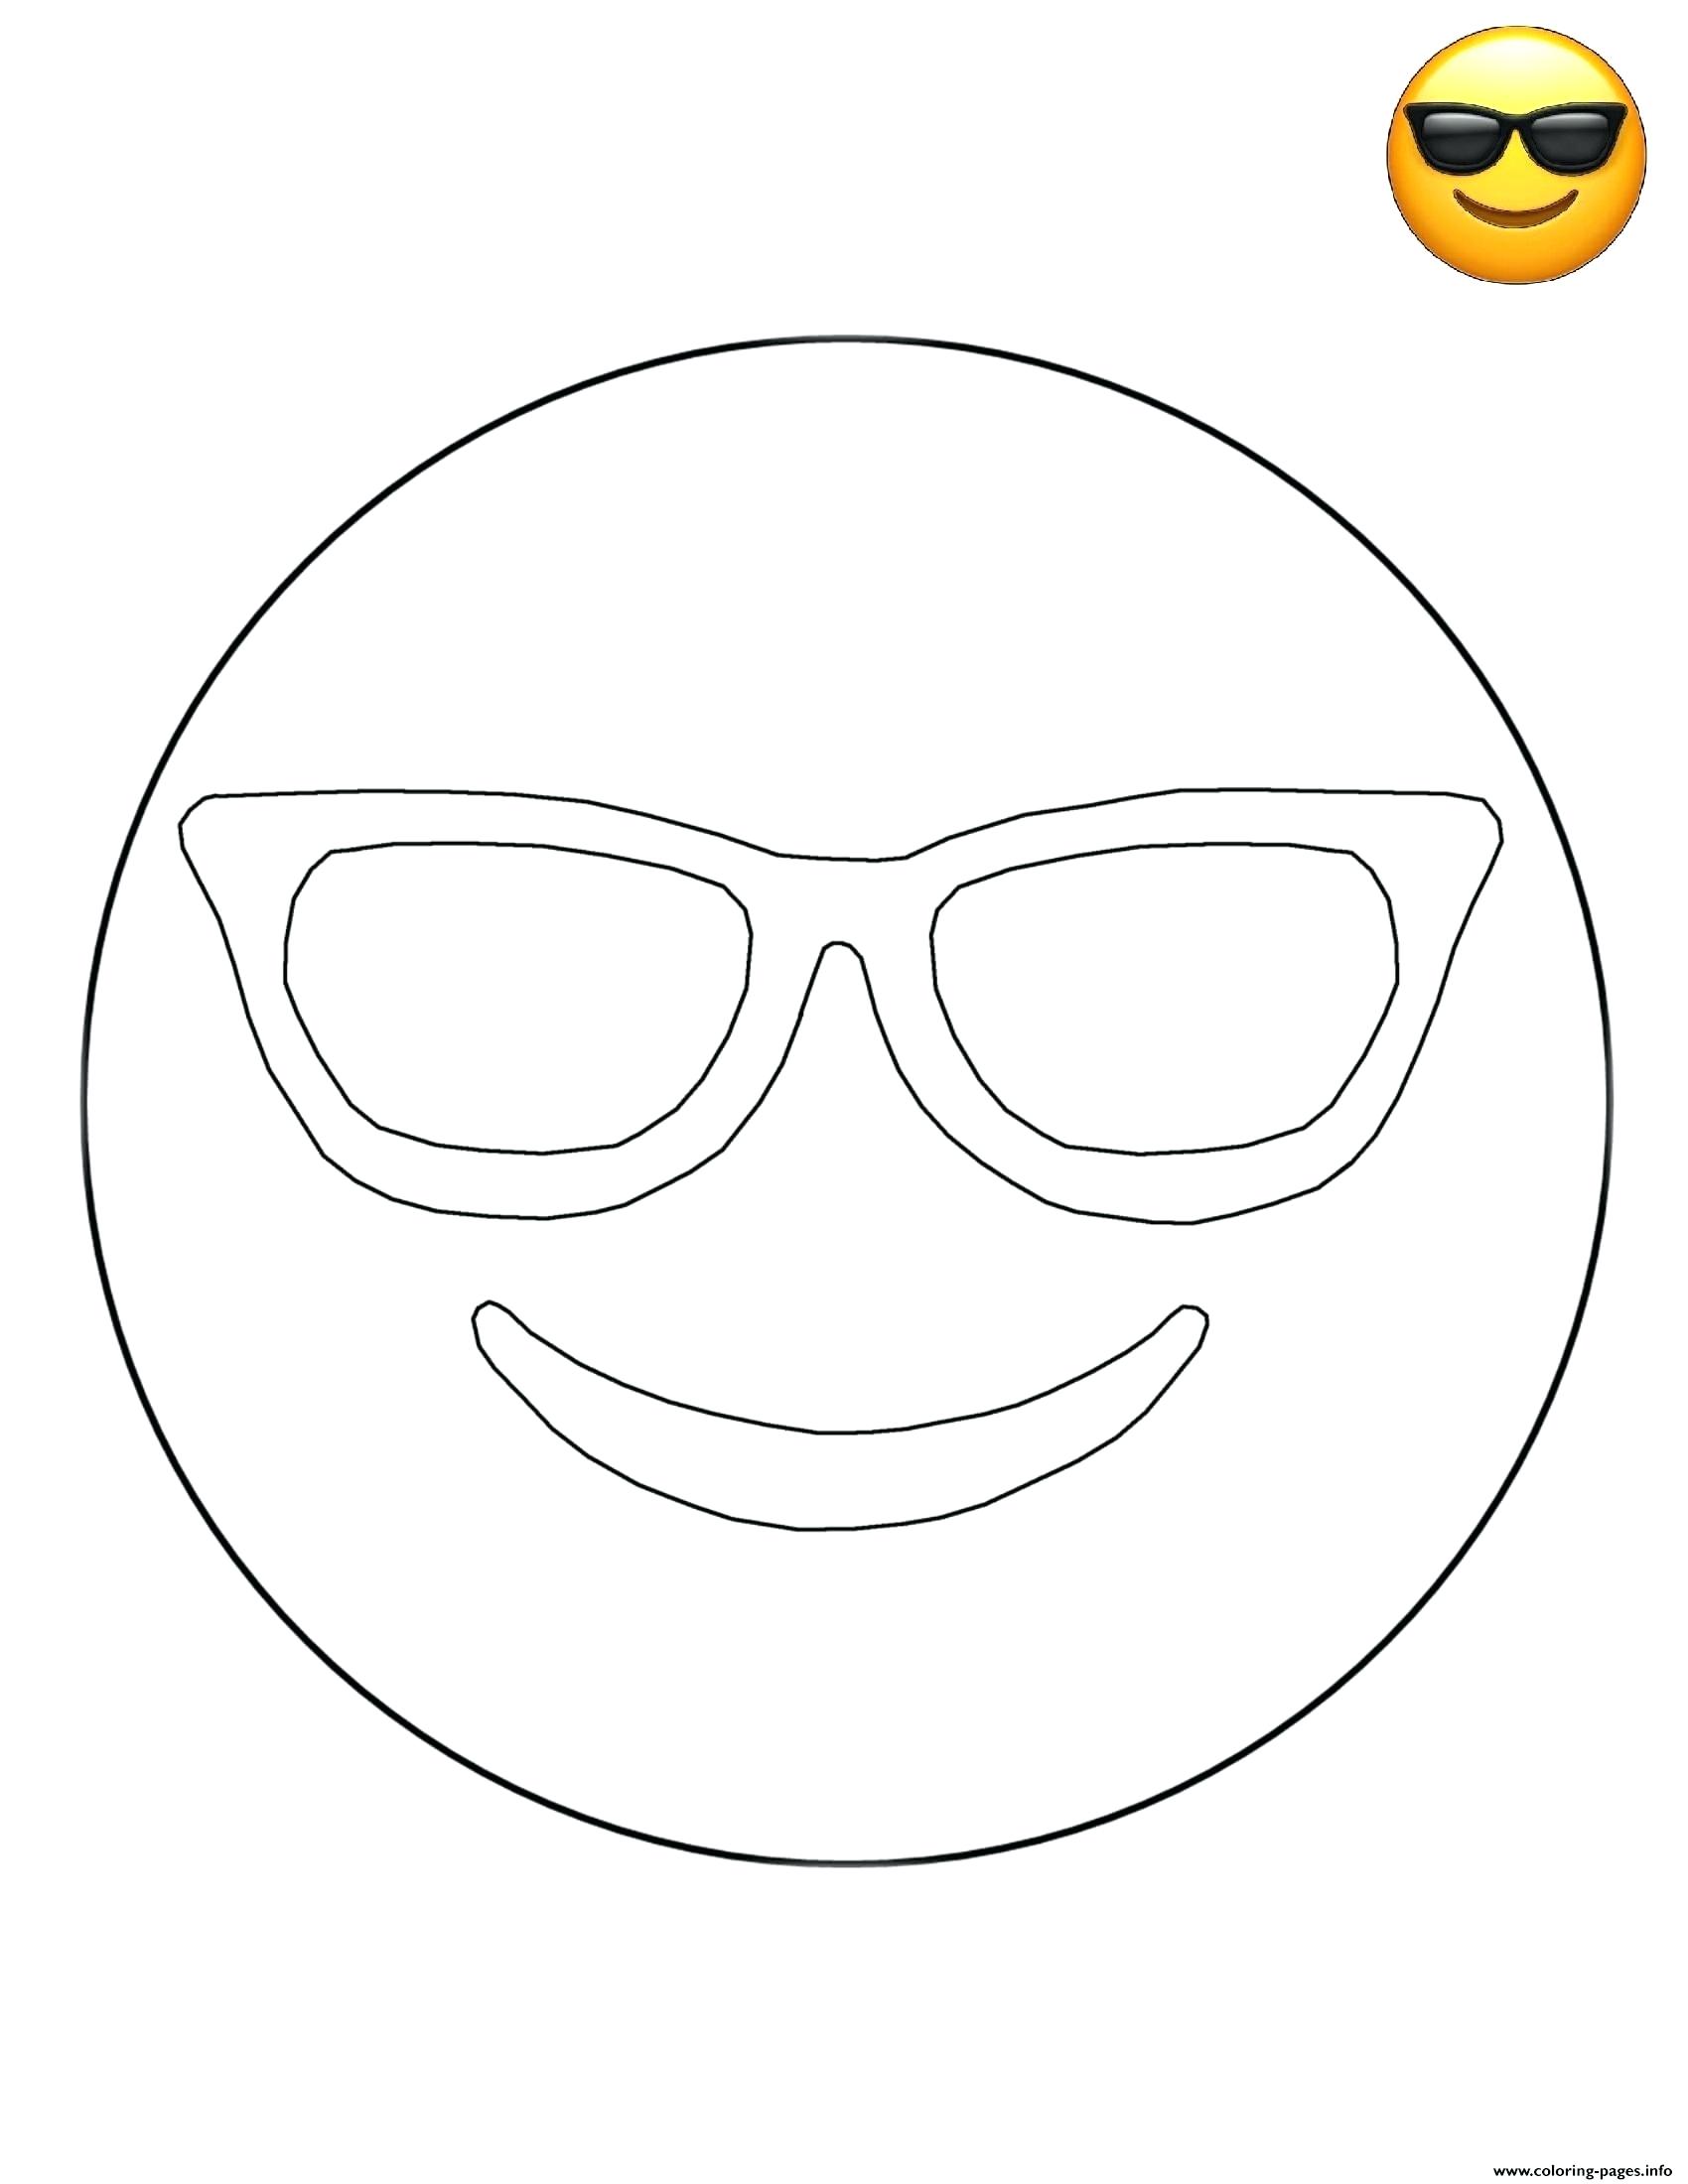 Sunglasses Coloring Pages - Coloring Home